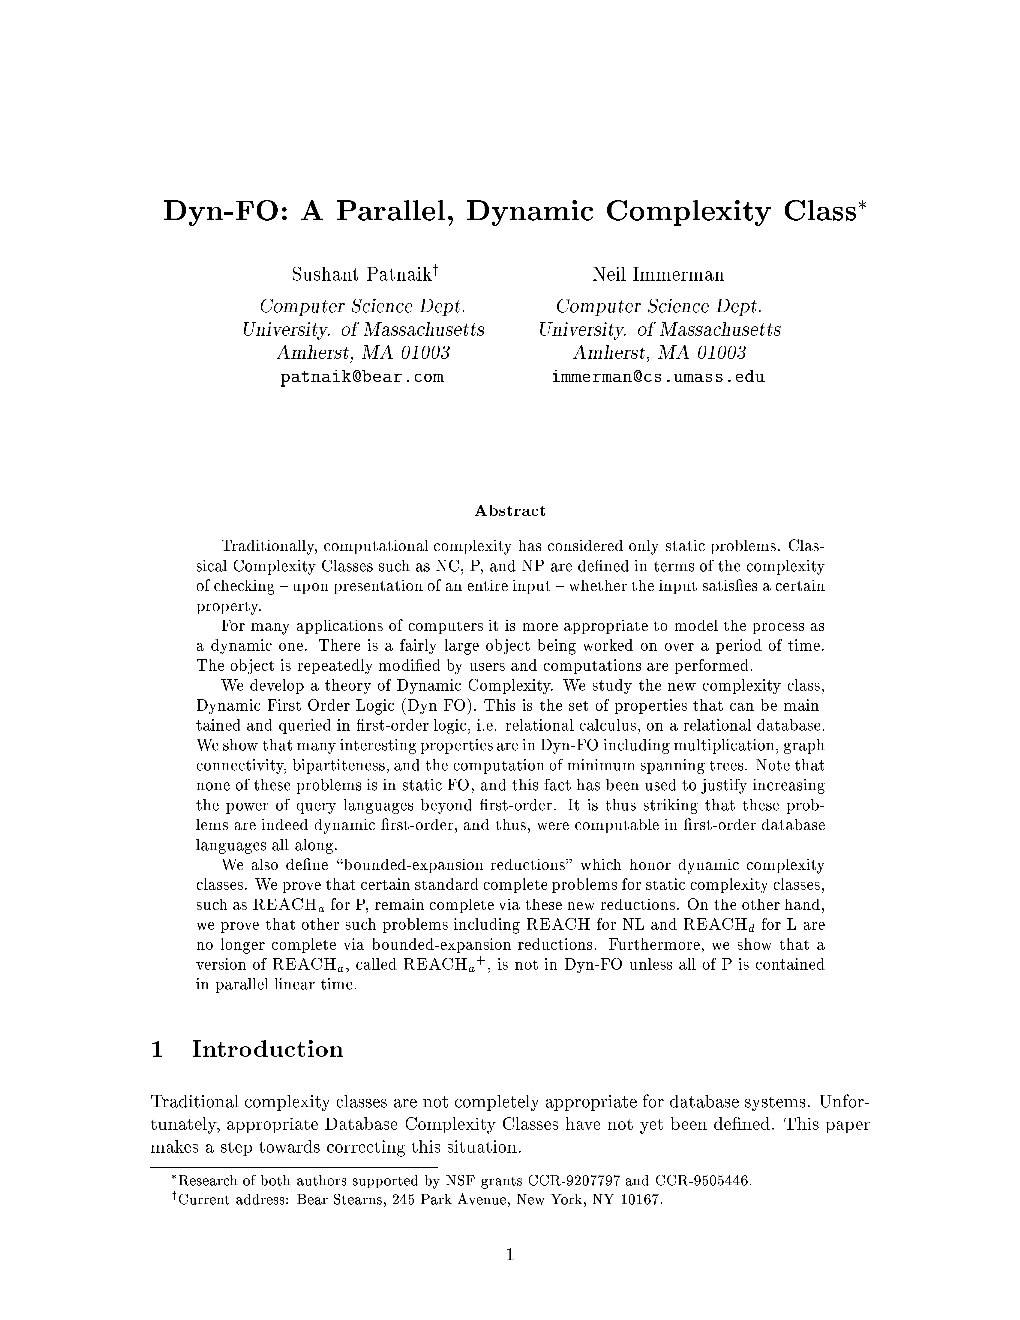 Dyn-FO: a Parallel, Dynamic Complexity Class